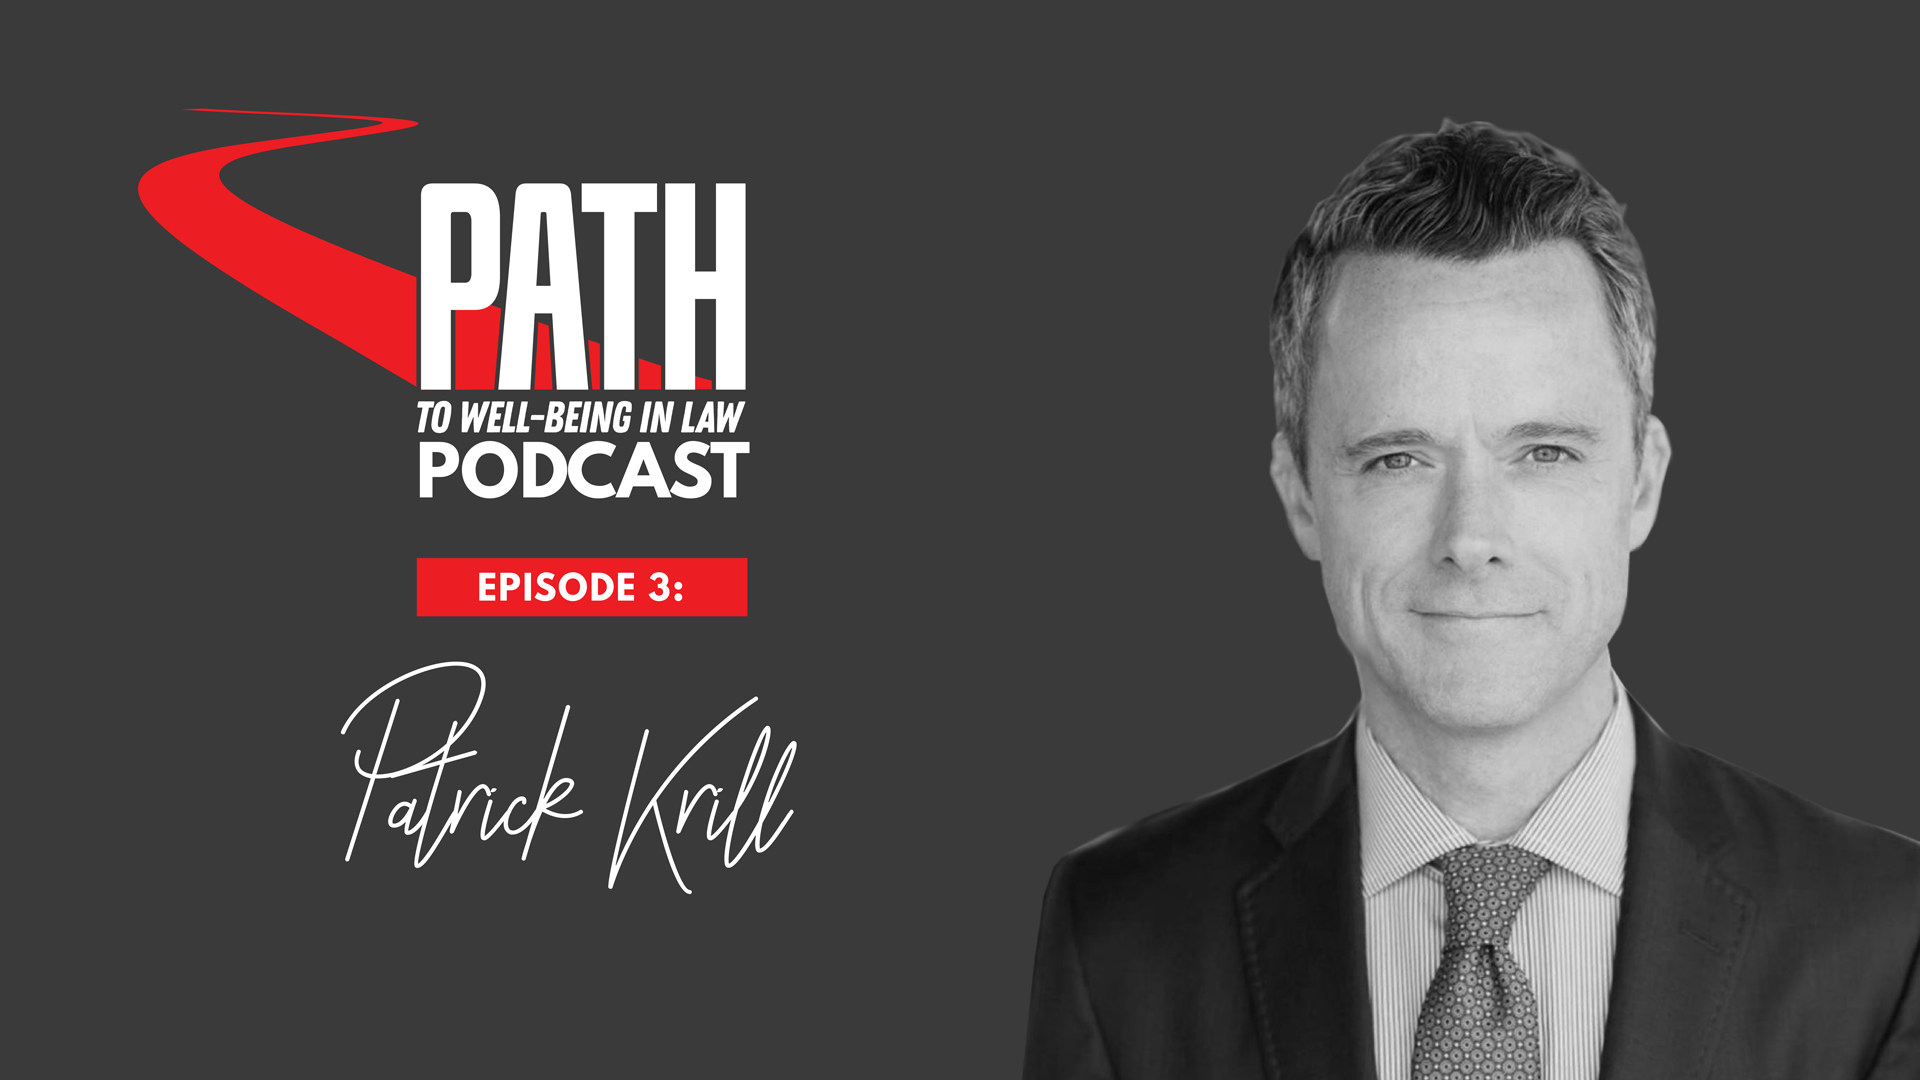 Path To Well-Being In Law: Episode 3 - Patrick Krill